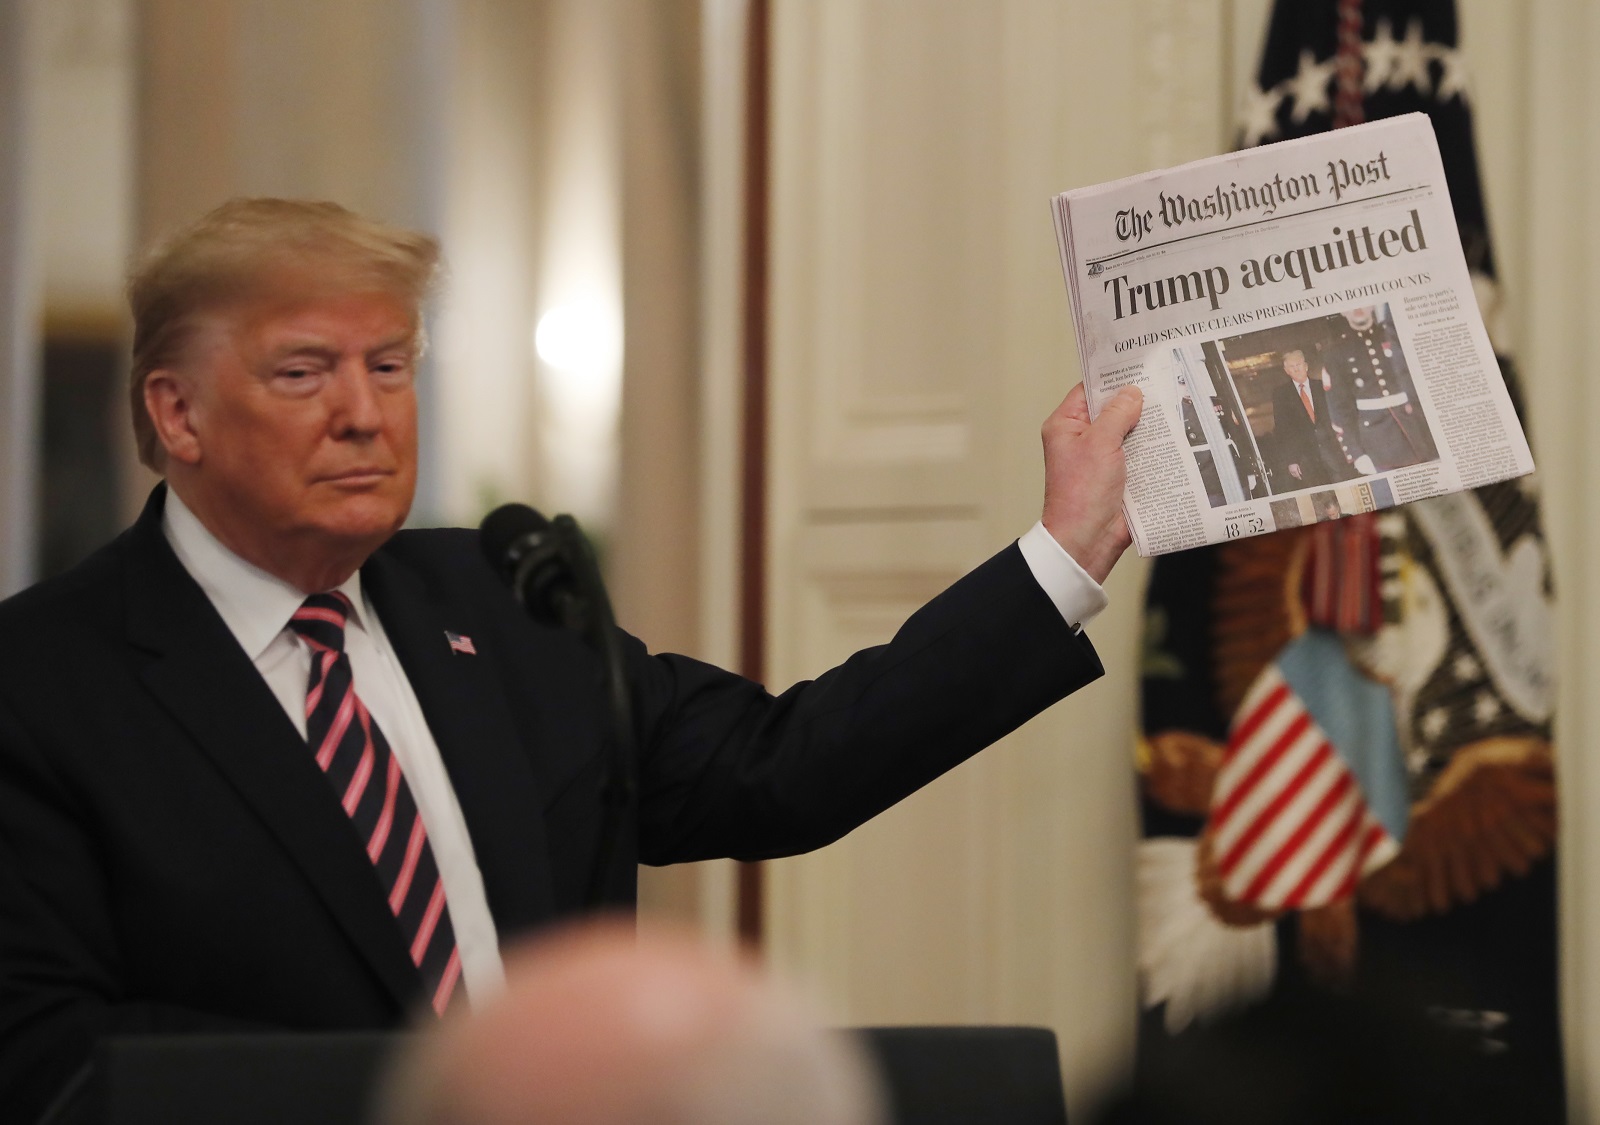 epa08939630 (FILE) US President Donald J. Trump holds the front page of the Washington Post with headline 'Trump acquitted' as he speaks in the East Room of the White House a day after his Senate impeachment trial acquittal in Washington, DC, USA, 06 February 2020. Trump was found not guilty on two articles of impeachment 05 February 2020 after a two-week trial. The presidency of Donald Trump, which records two presidential impeachments, will end at noon on 20 January 2021.  EPA/ERIK S. LESSER *** Local Caption *** 55854439